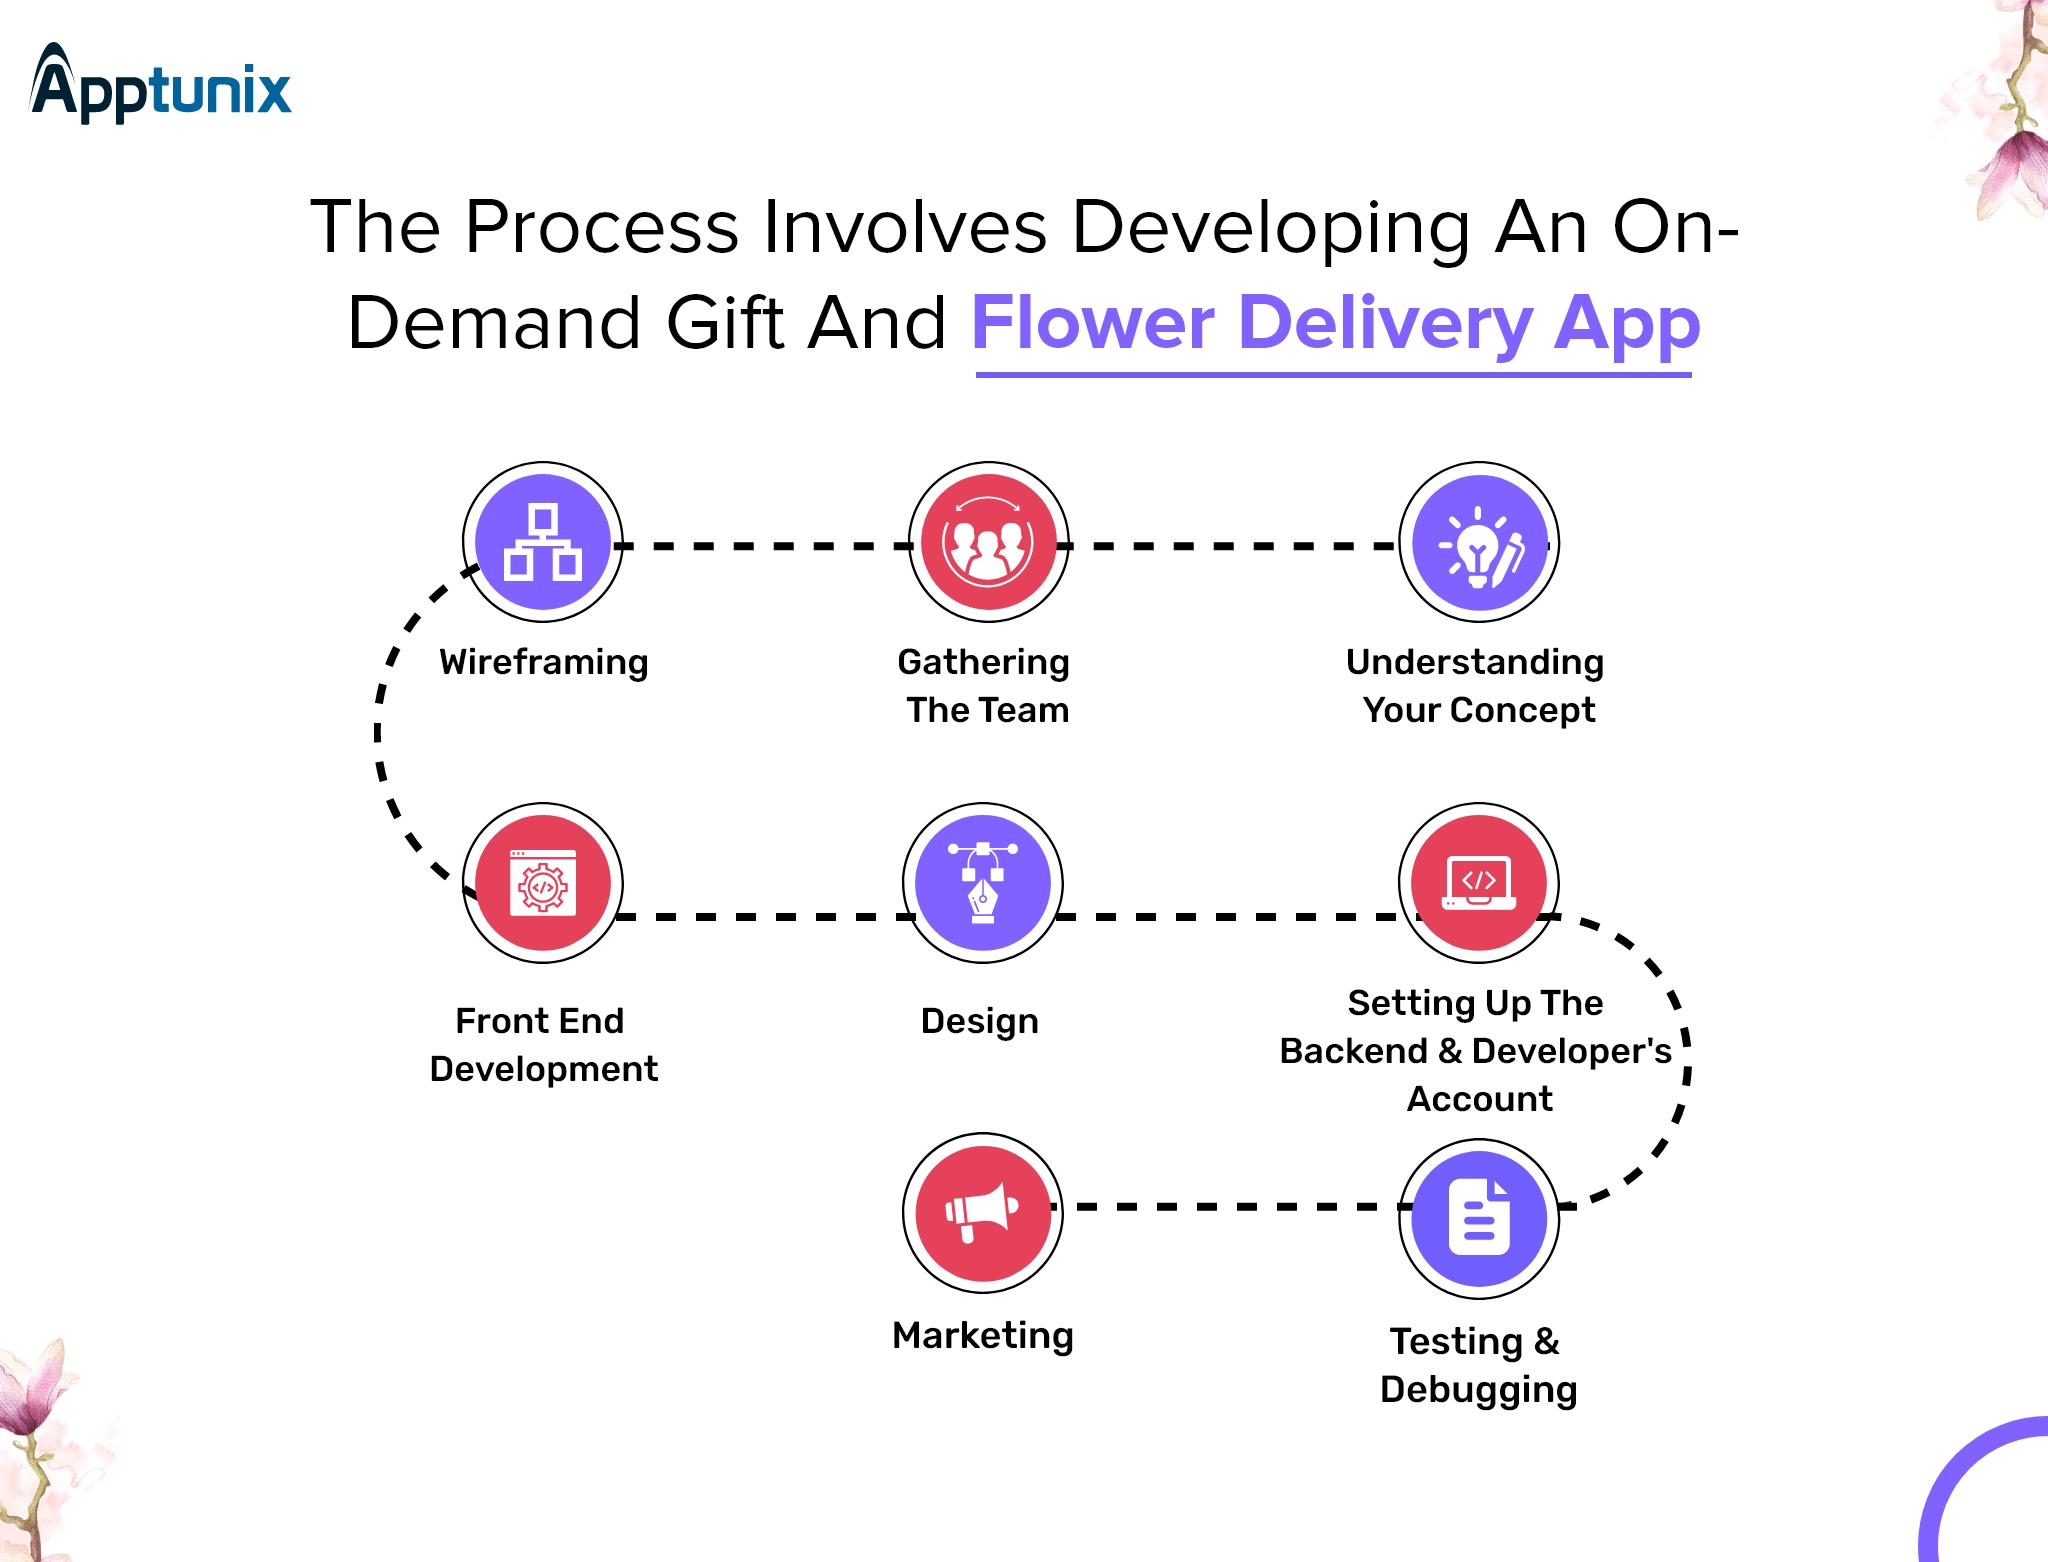 how to develop on-demadn gift and flower delivery app